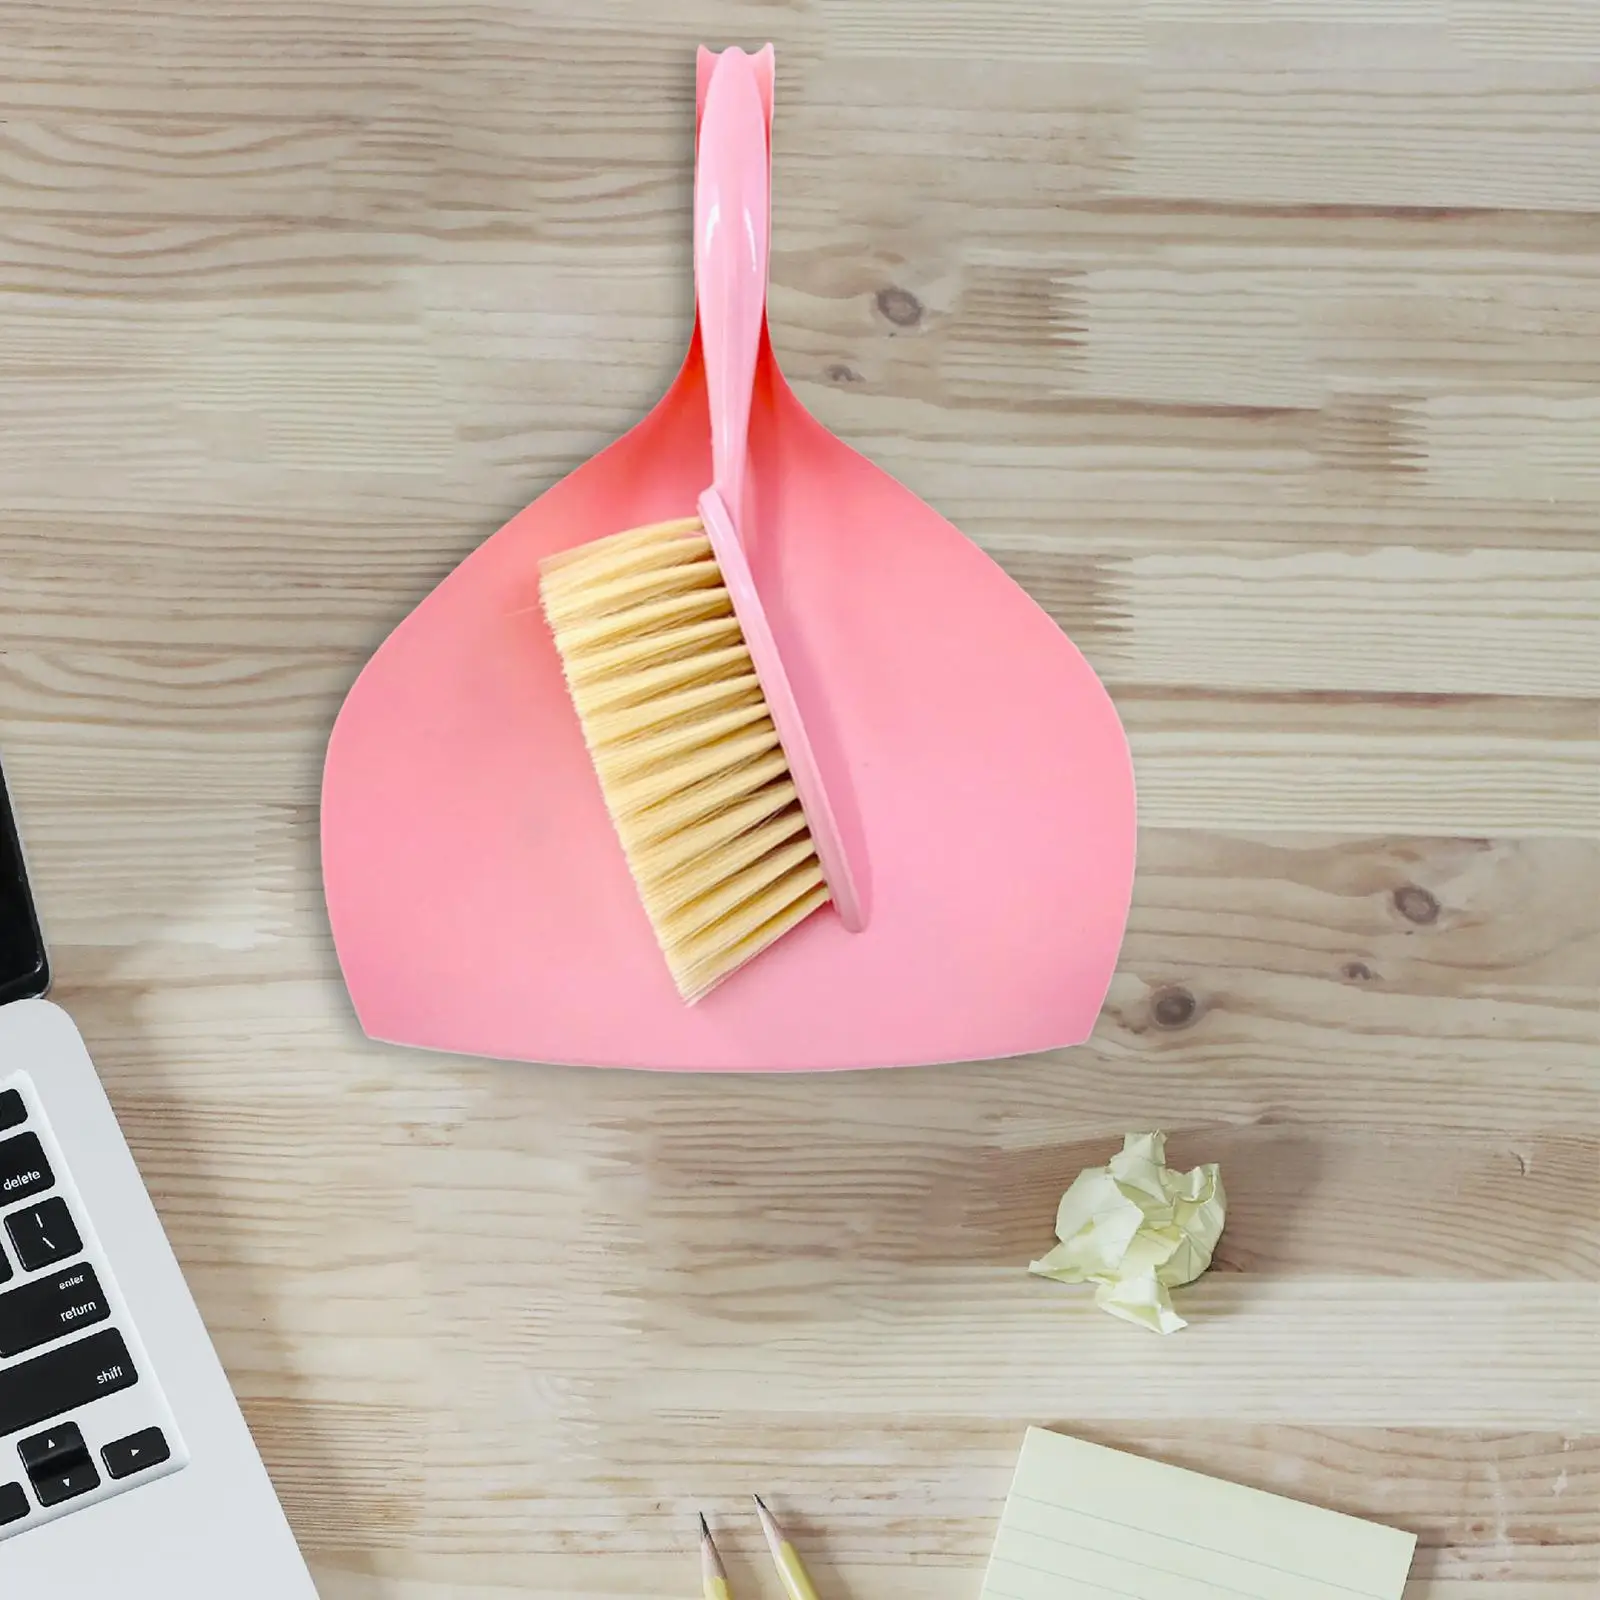 Mini Cleaning Broom Brush Set Portable Small Easy Cleaning Reuse Durable Cleaning Brush Dustpan and Stiff Brush Set for Office